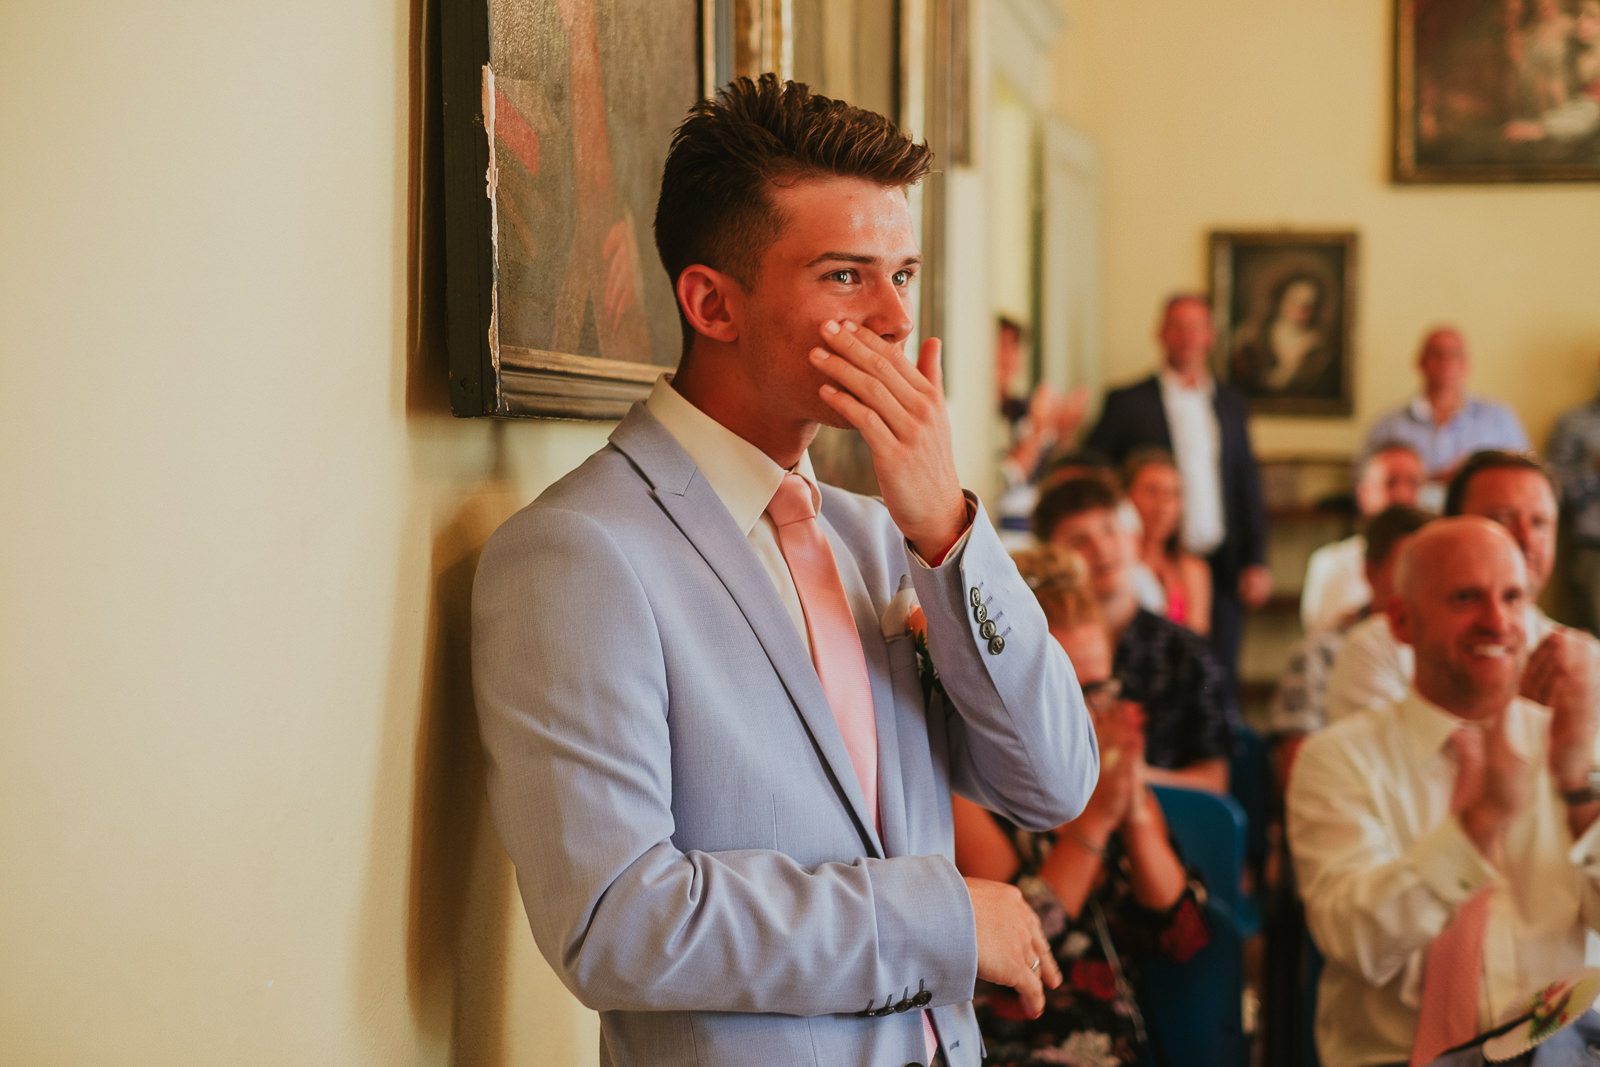 bride's son deeply touched seeing his mom getting married